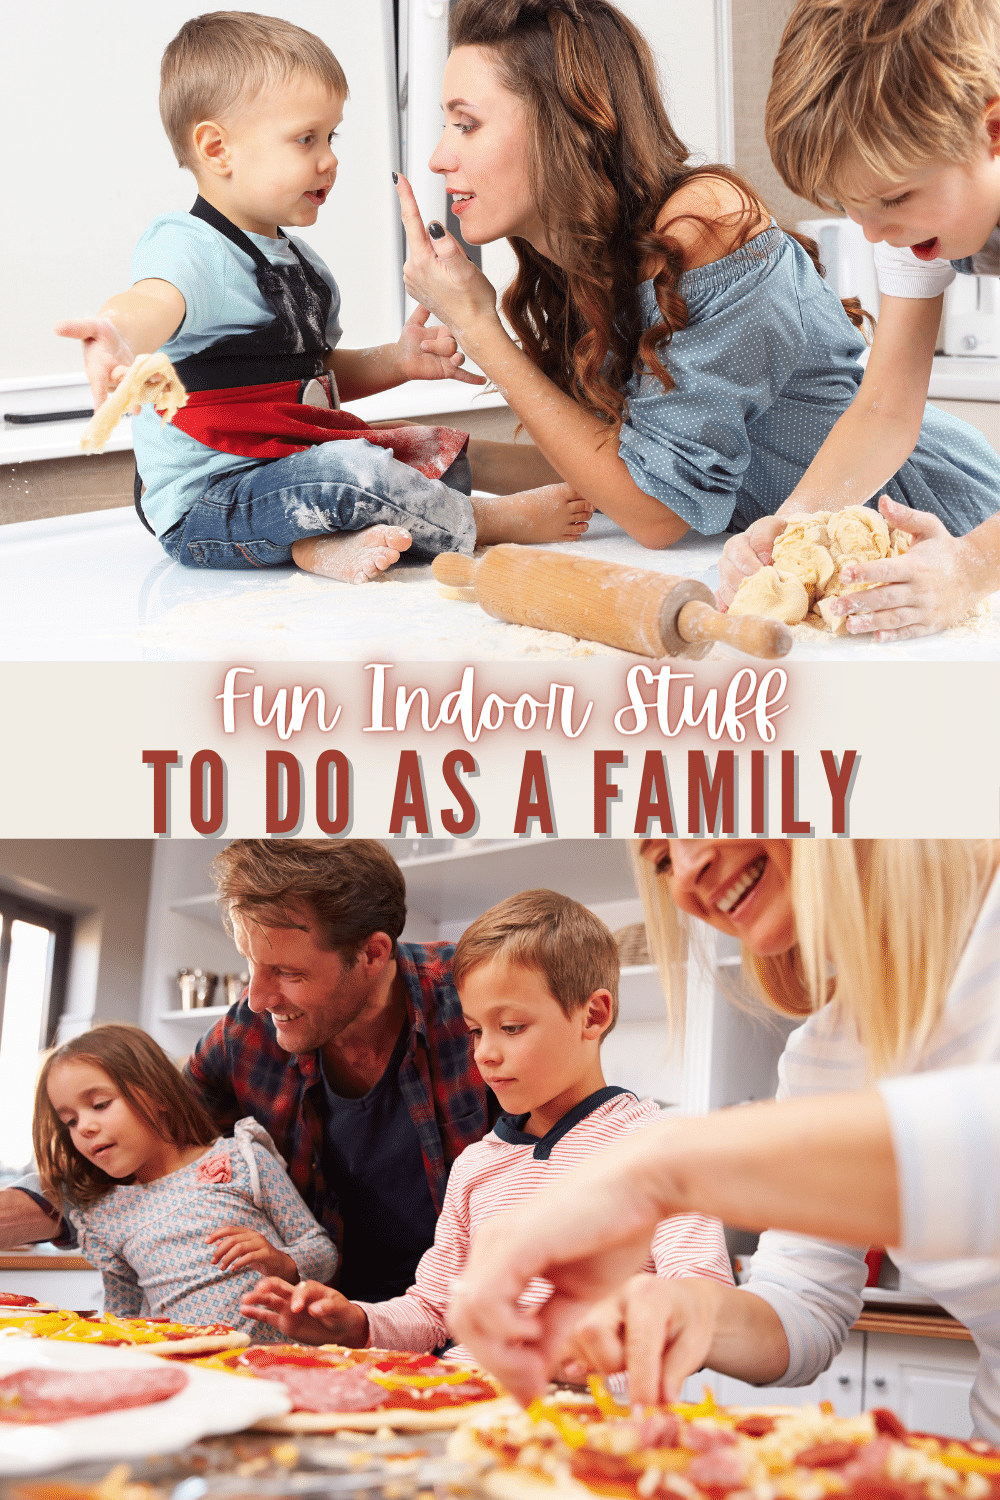 A great idea list of indoor stuff to do as a family that everyone will enjoy! Wonderful ways to create family memories. #familyfun #familytime #indooractivities via @wondermomwannab